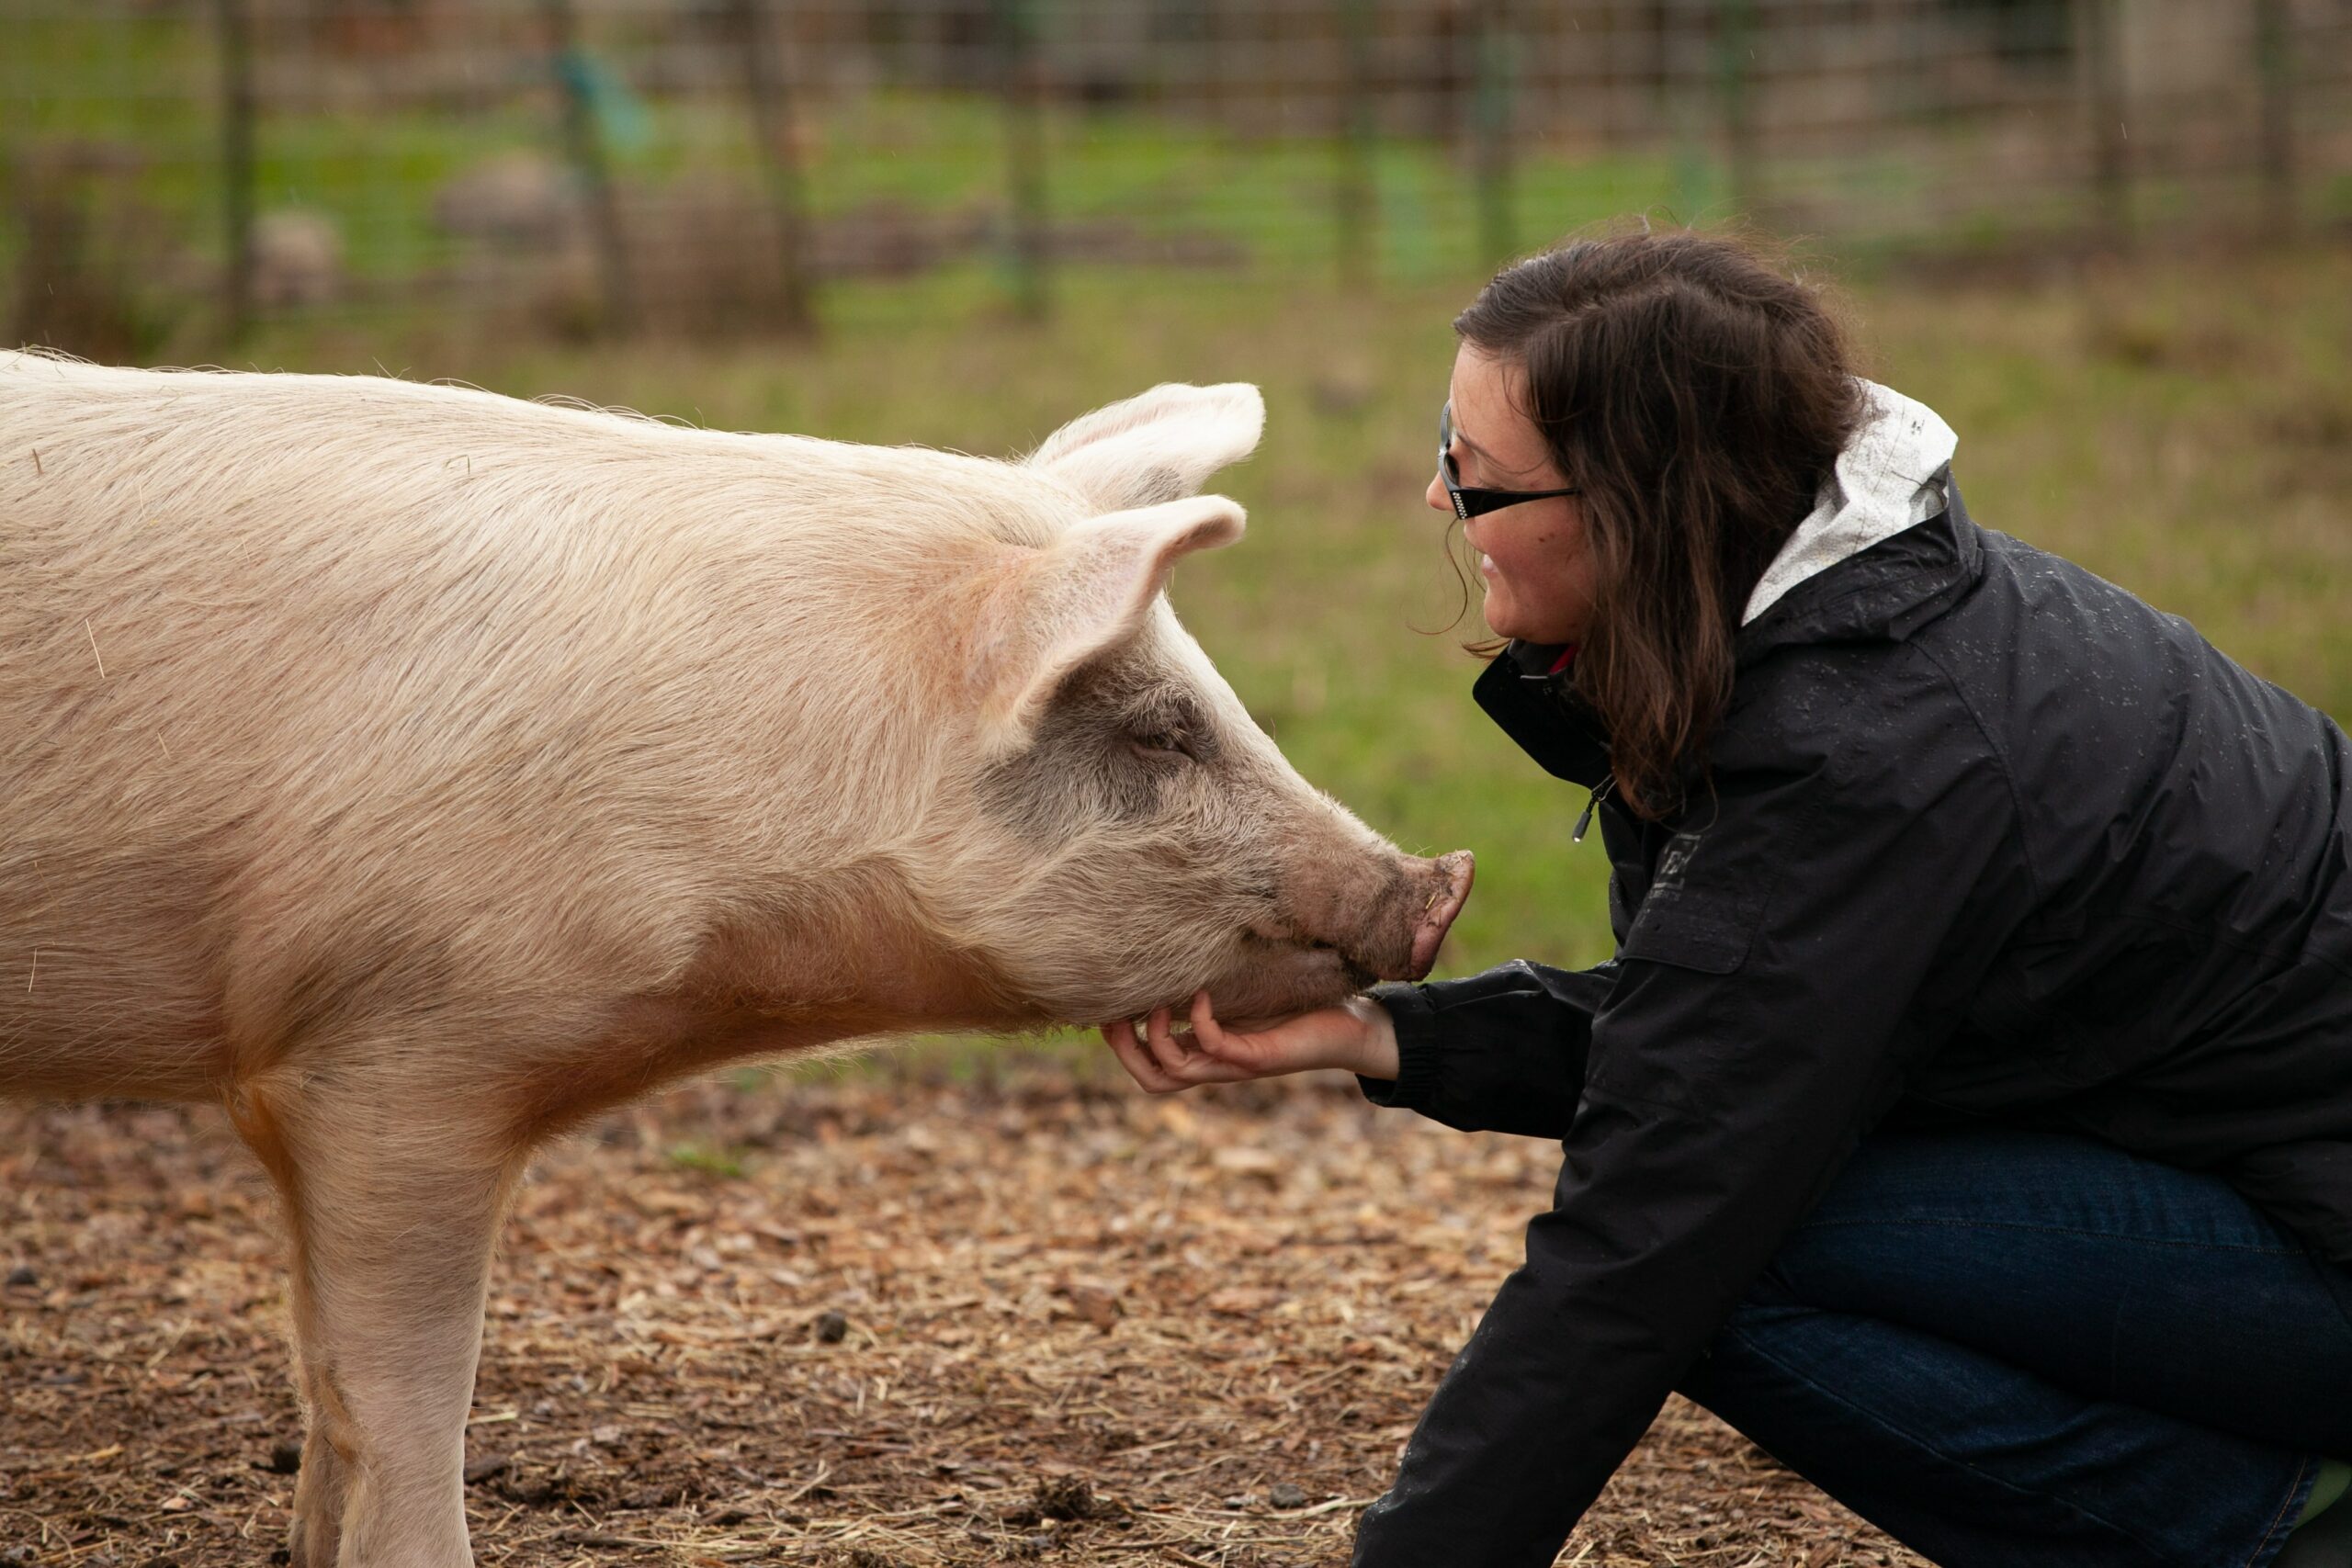 Piggie says hello to a visitor at a farm animal sanctuary.